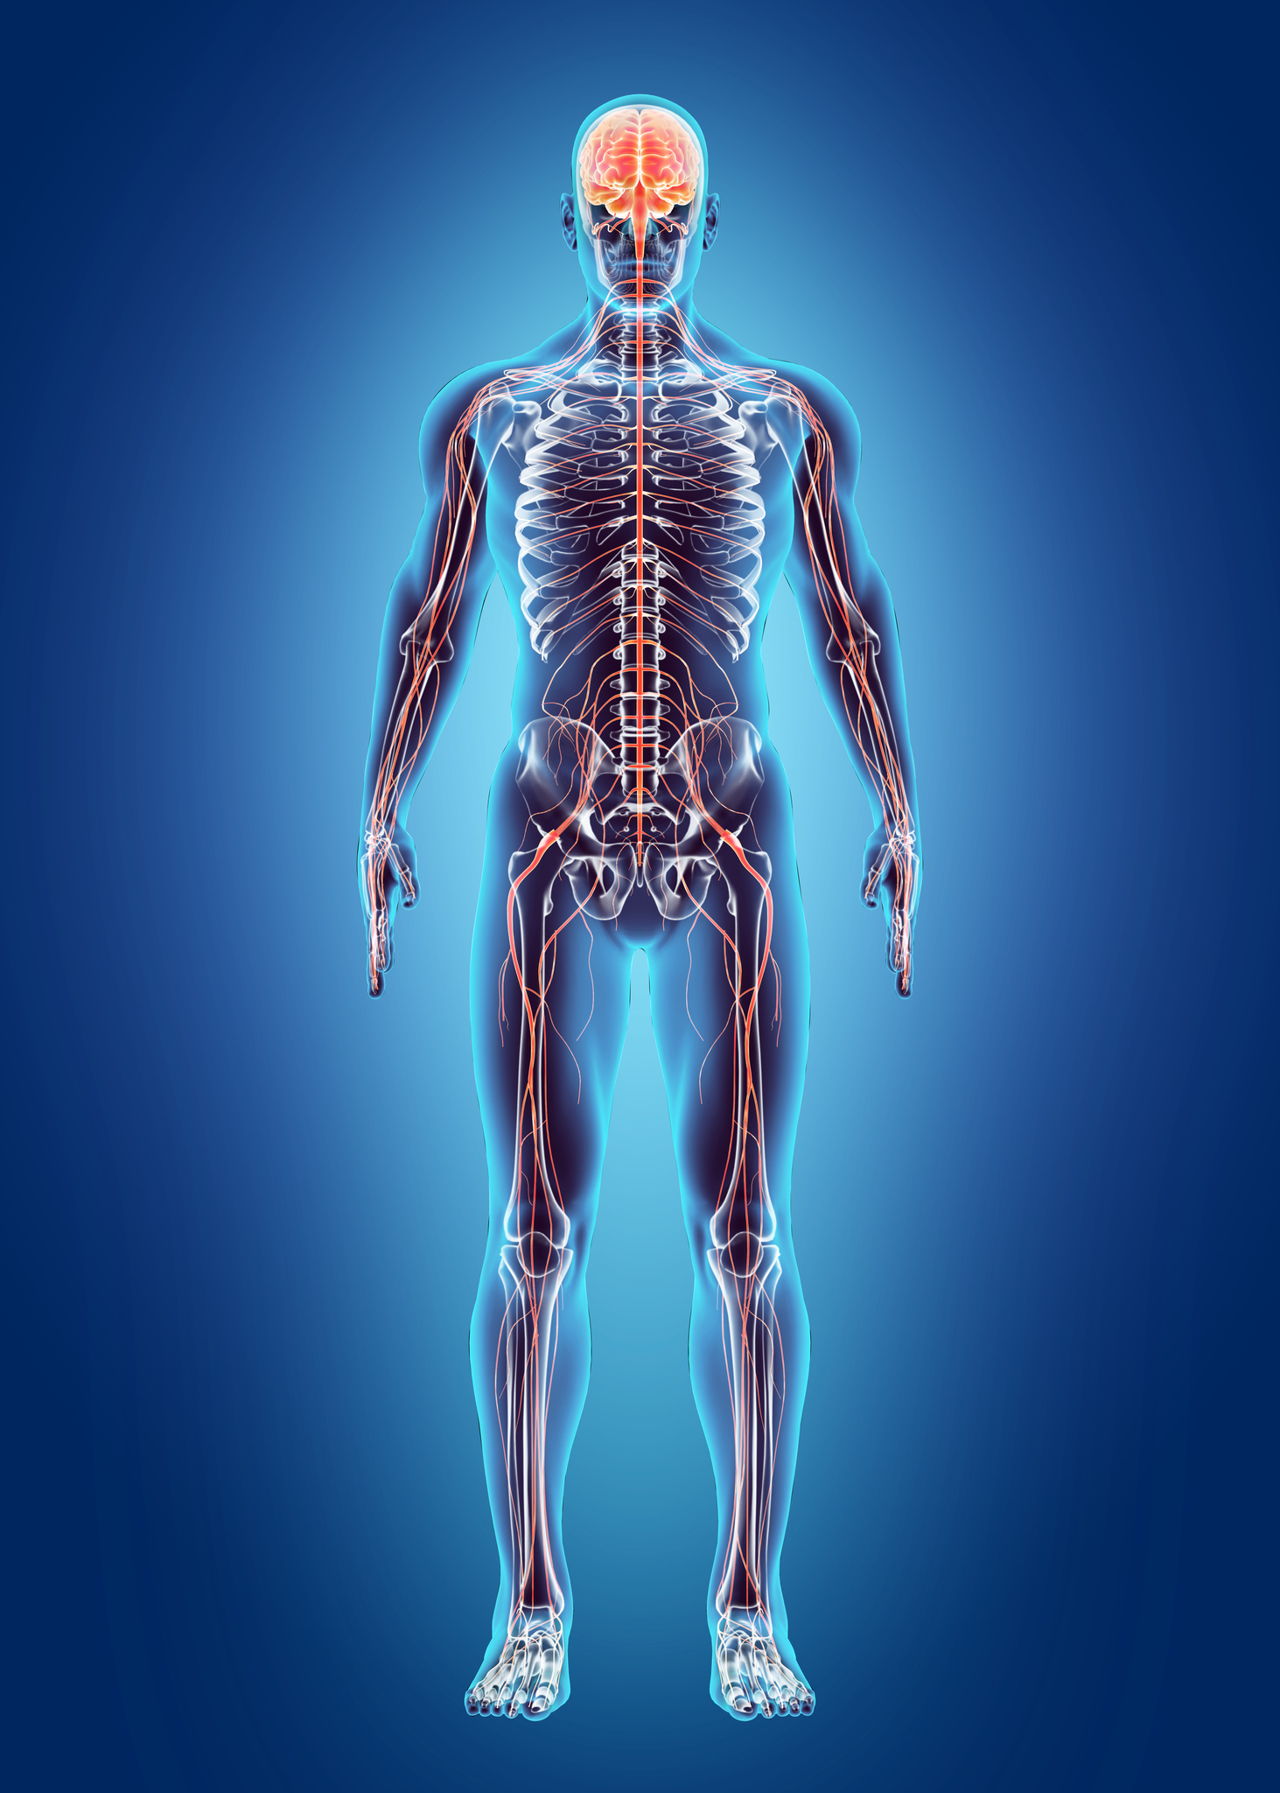 Visual Guide to Your Nervous System | Retiree News